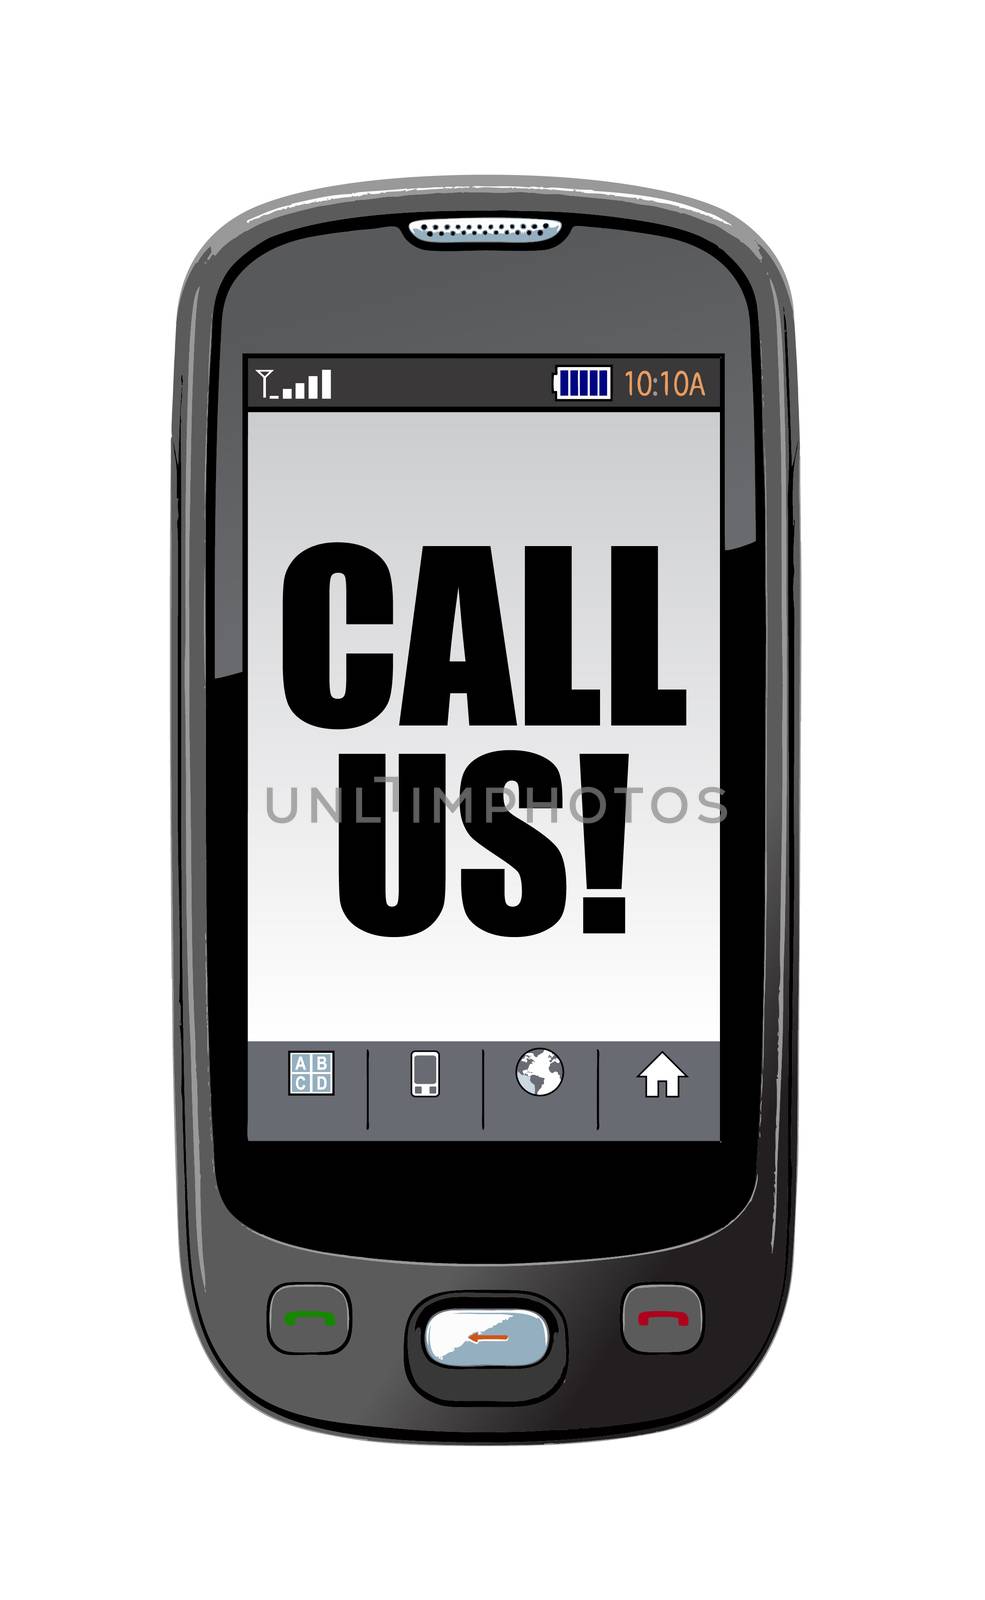 call us cellphone illustration design isolated over a white background